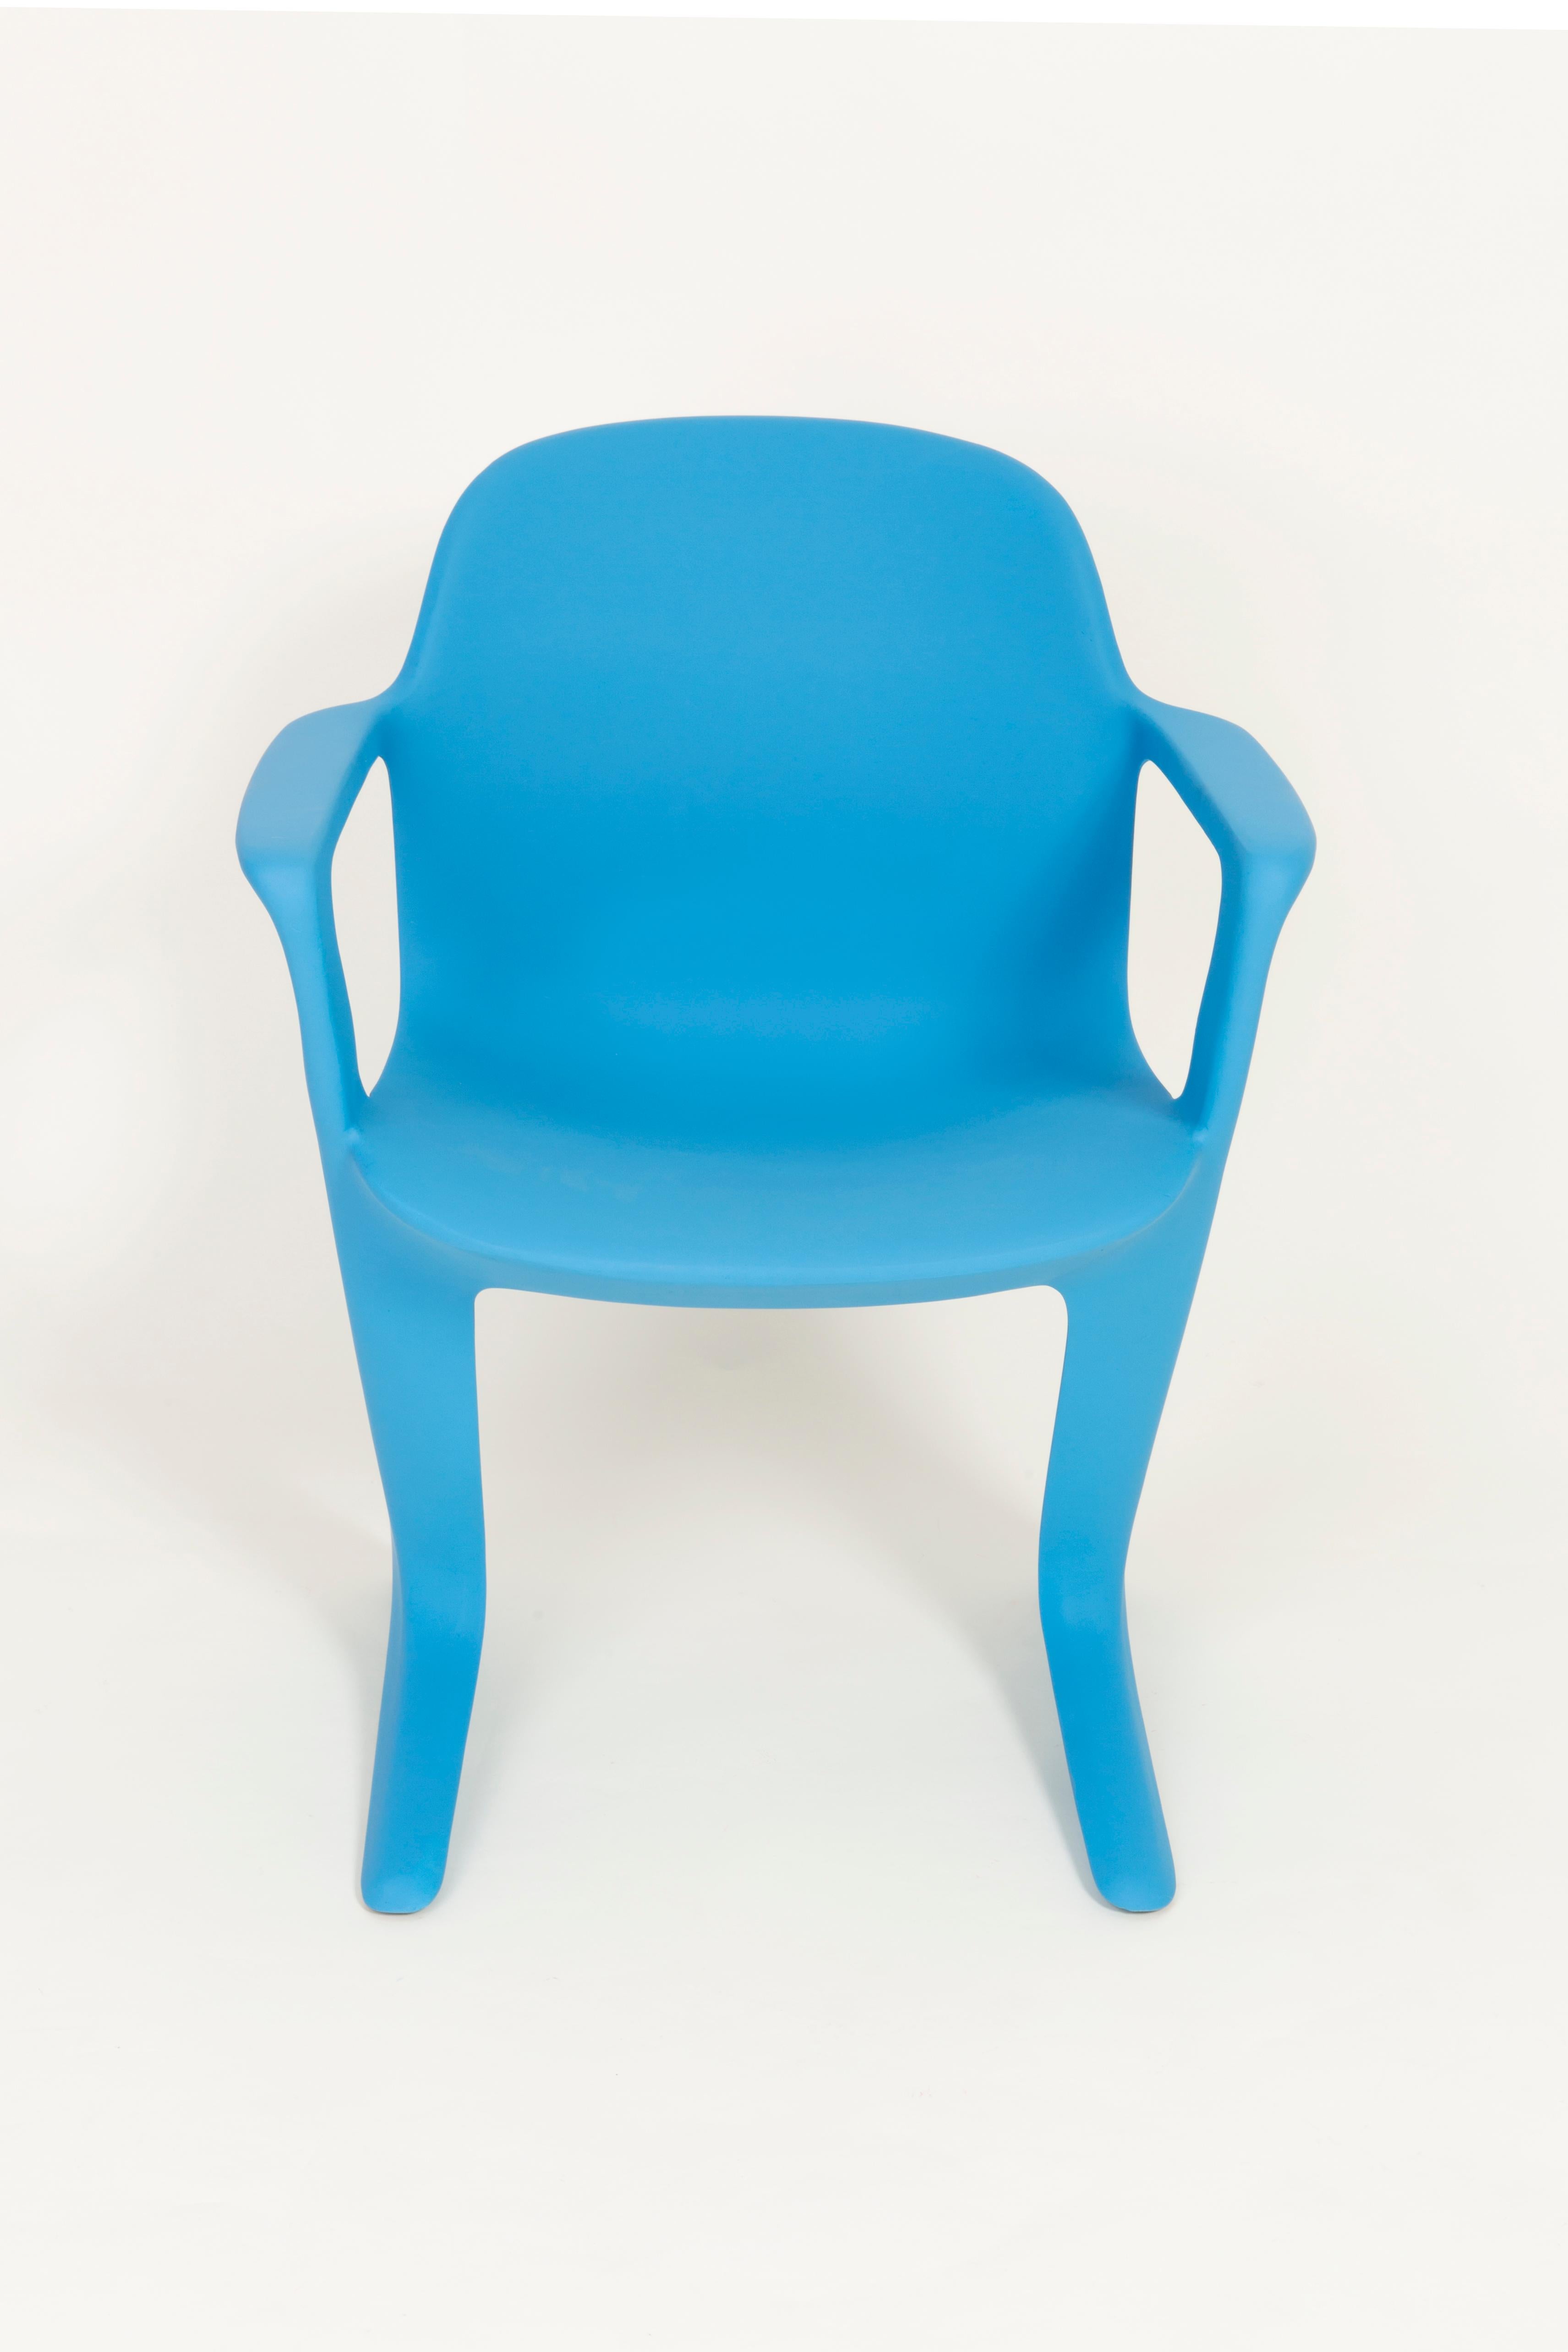 20th Century Set of Two Blue Kangaroo Chairs Designed by Ernst Moeckl, Germany, 1968 For Sale